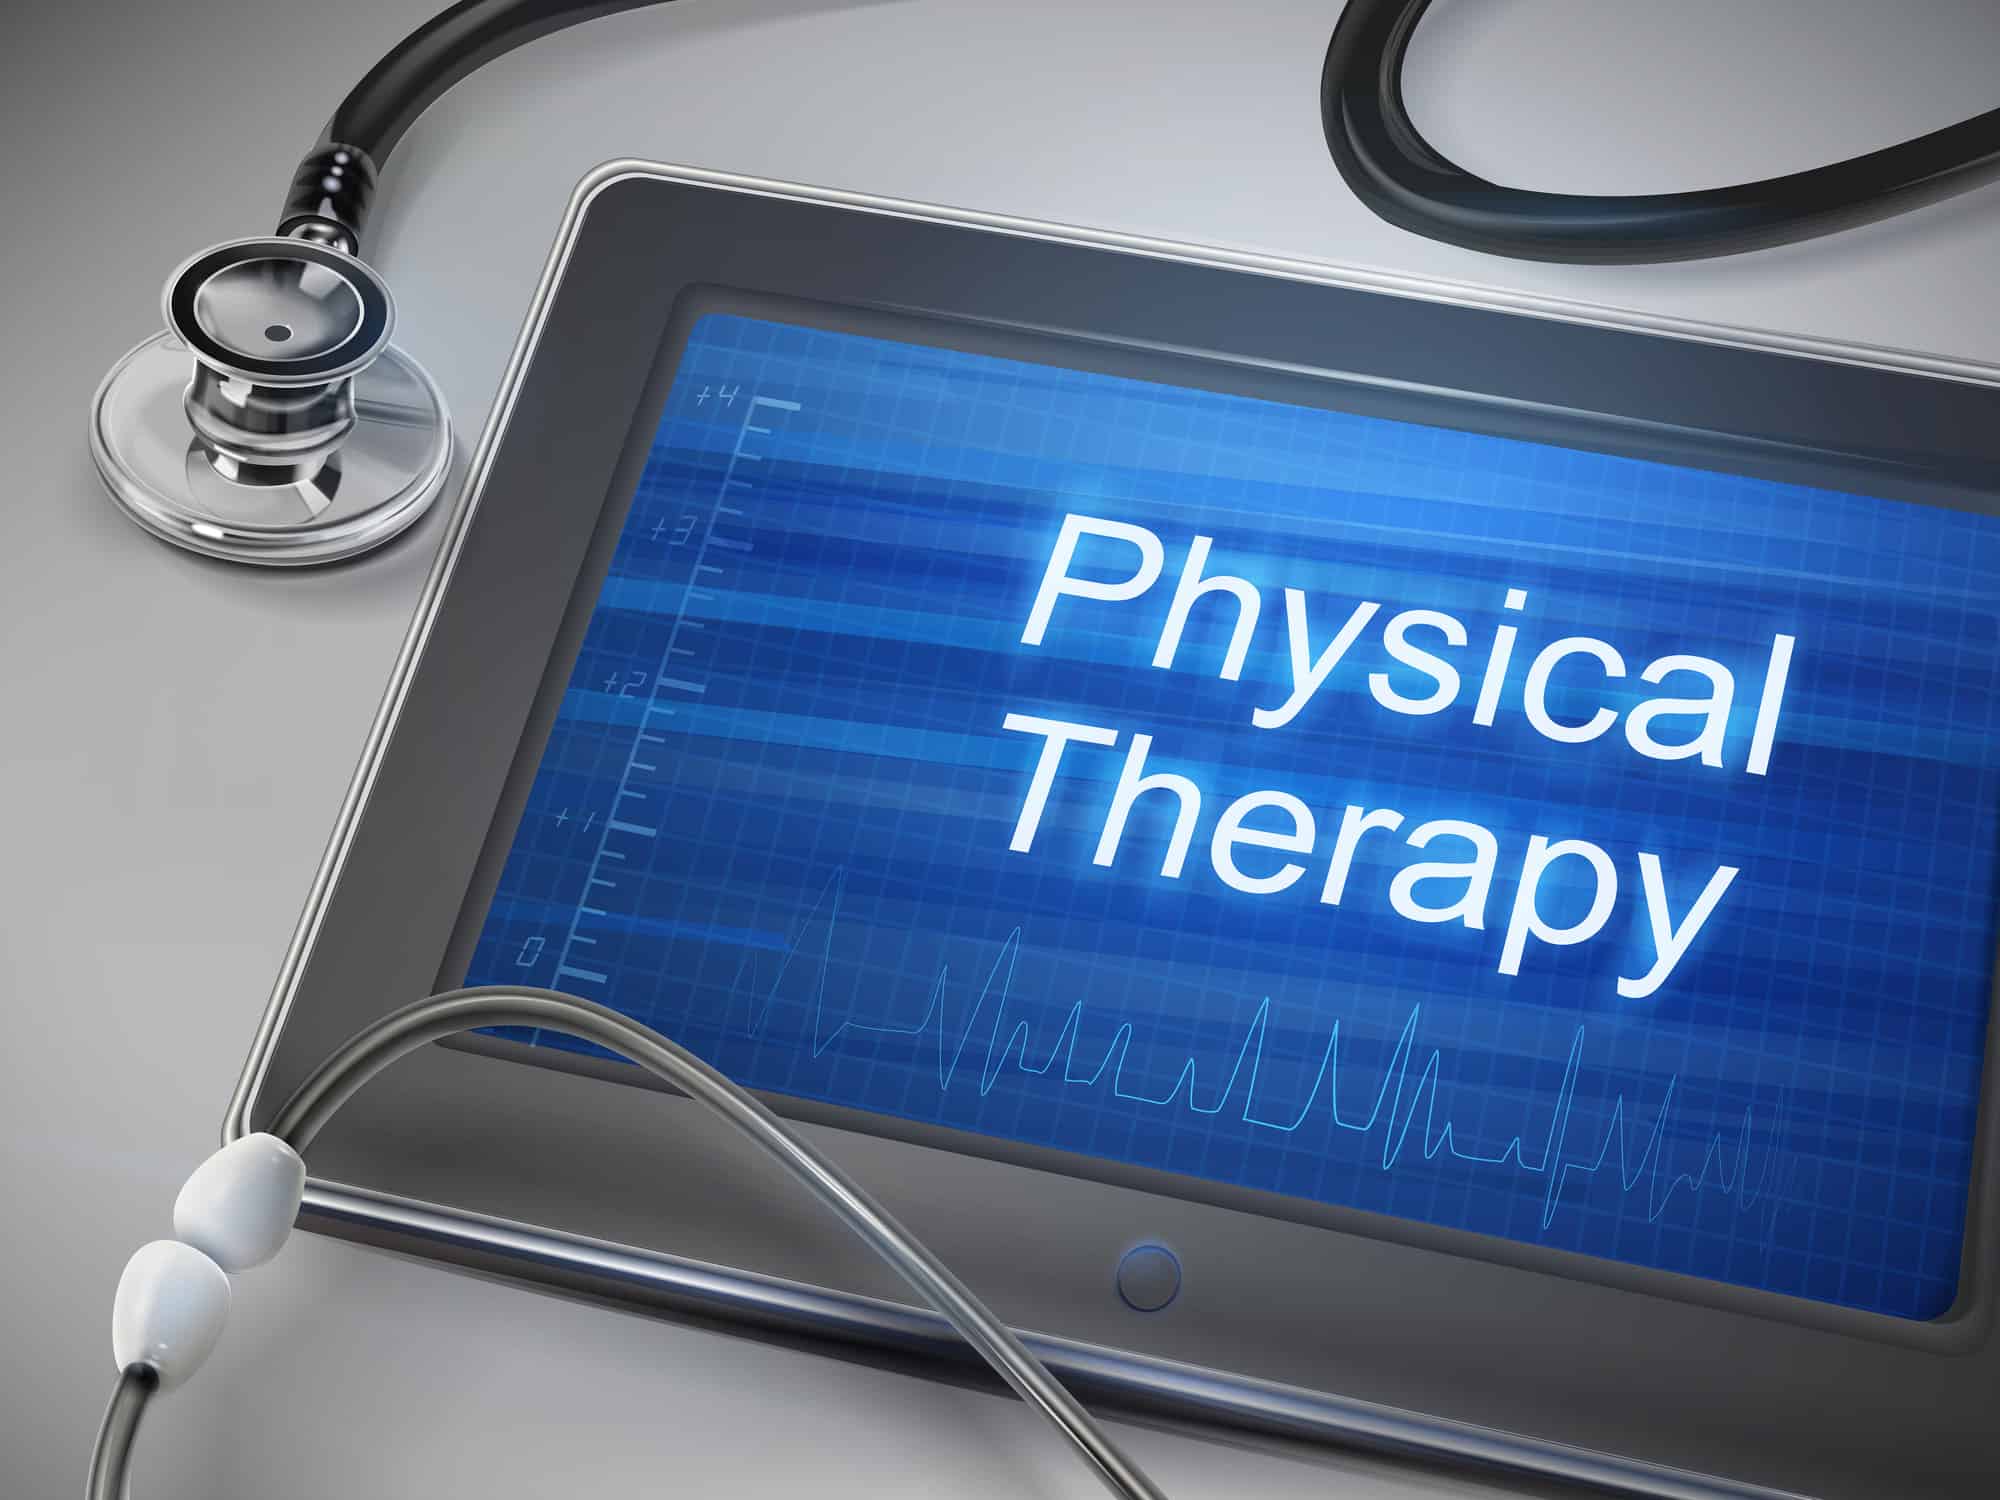 physical therapy words displayed on tablet with stethoscope over table